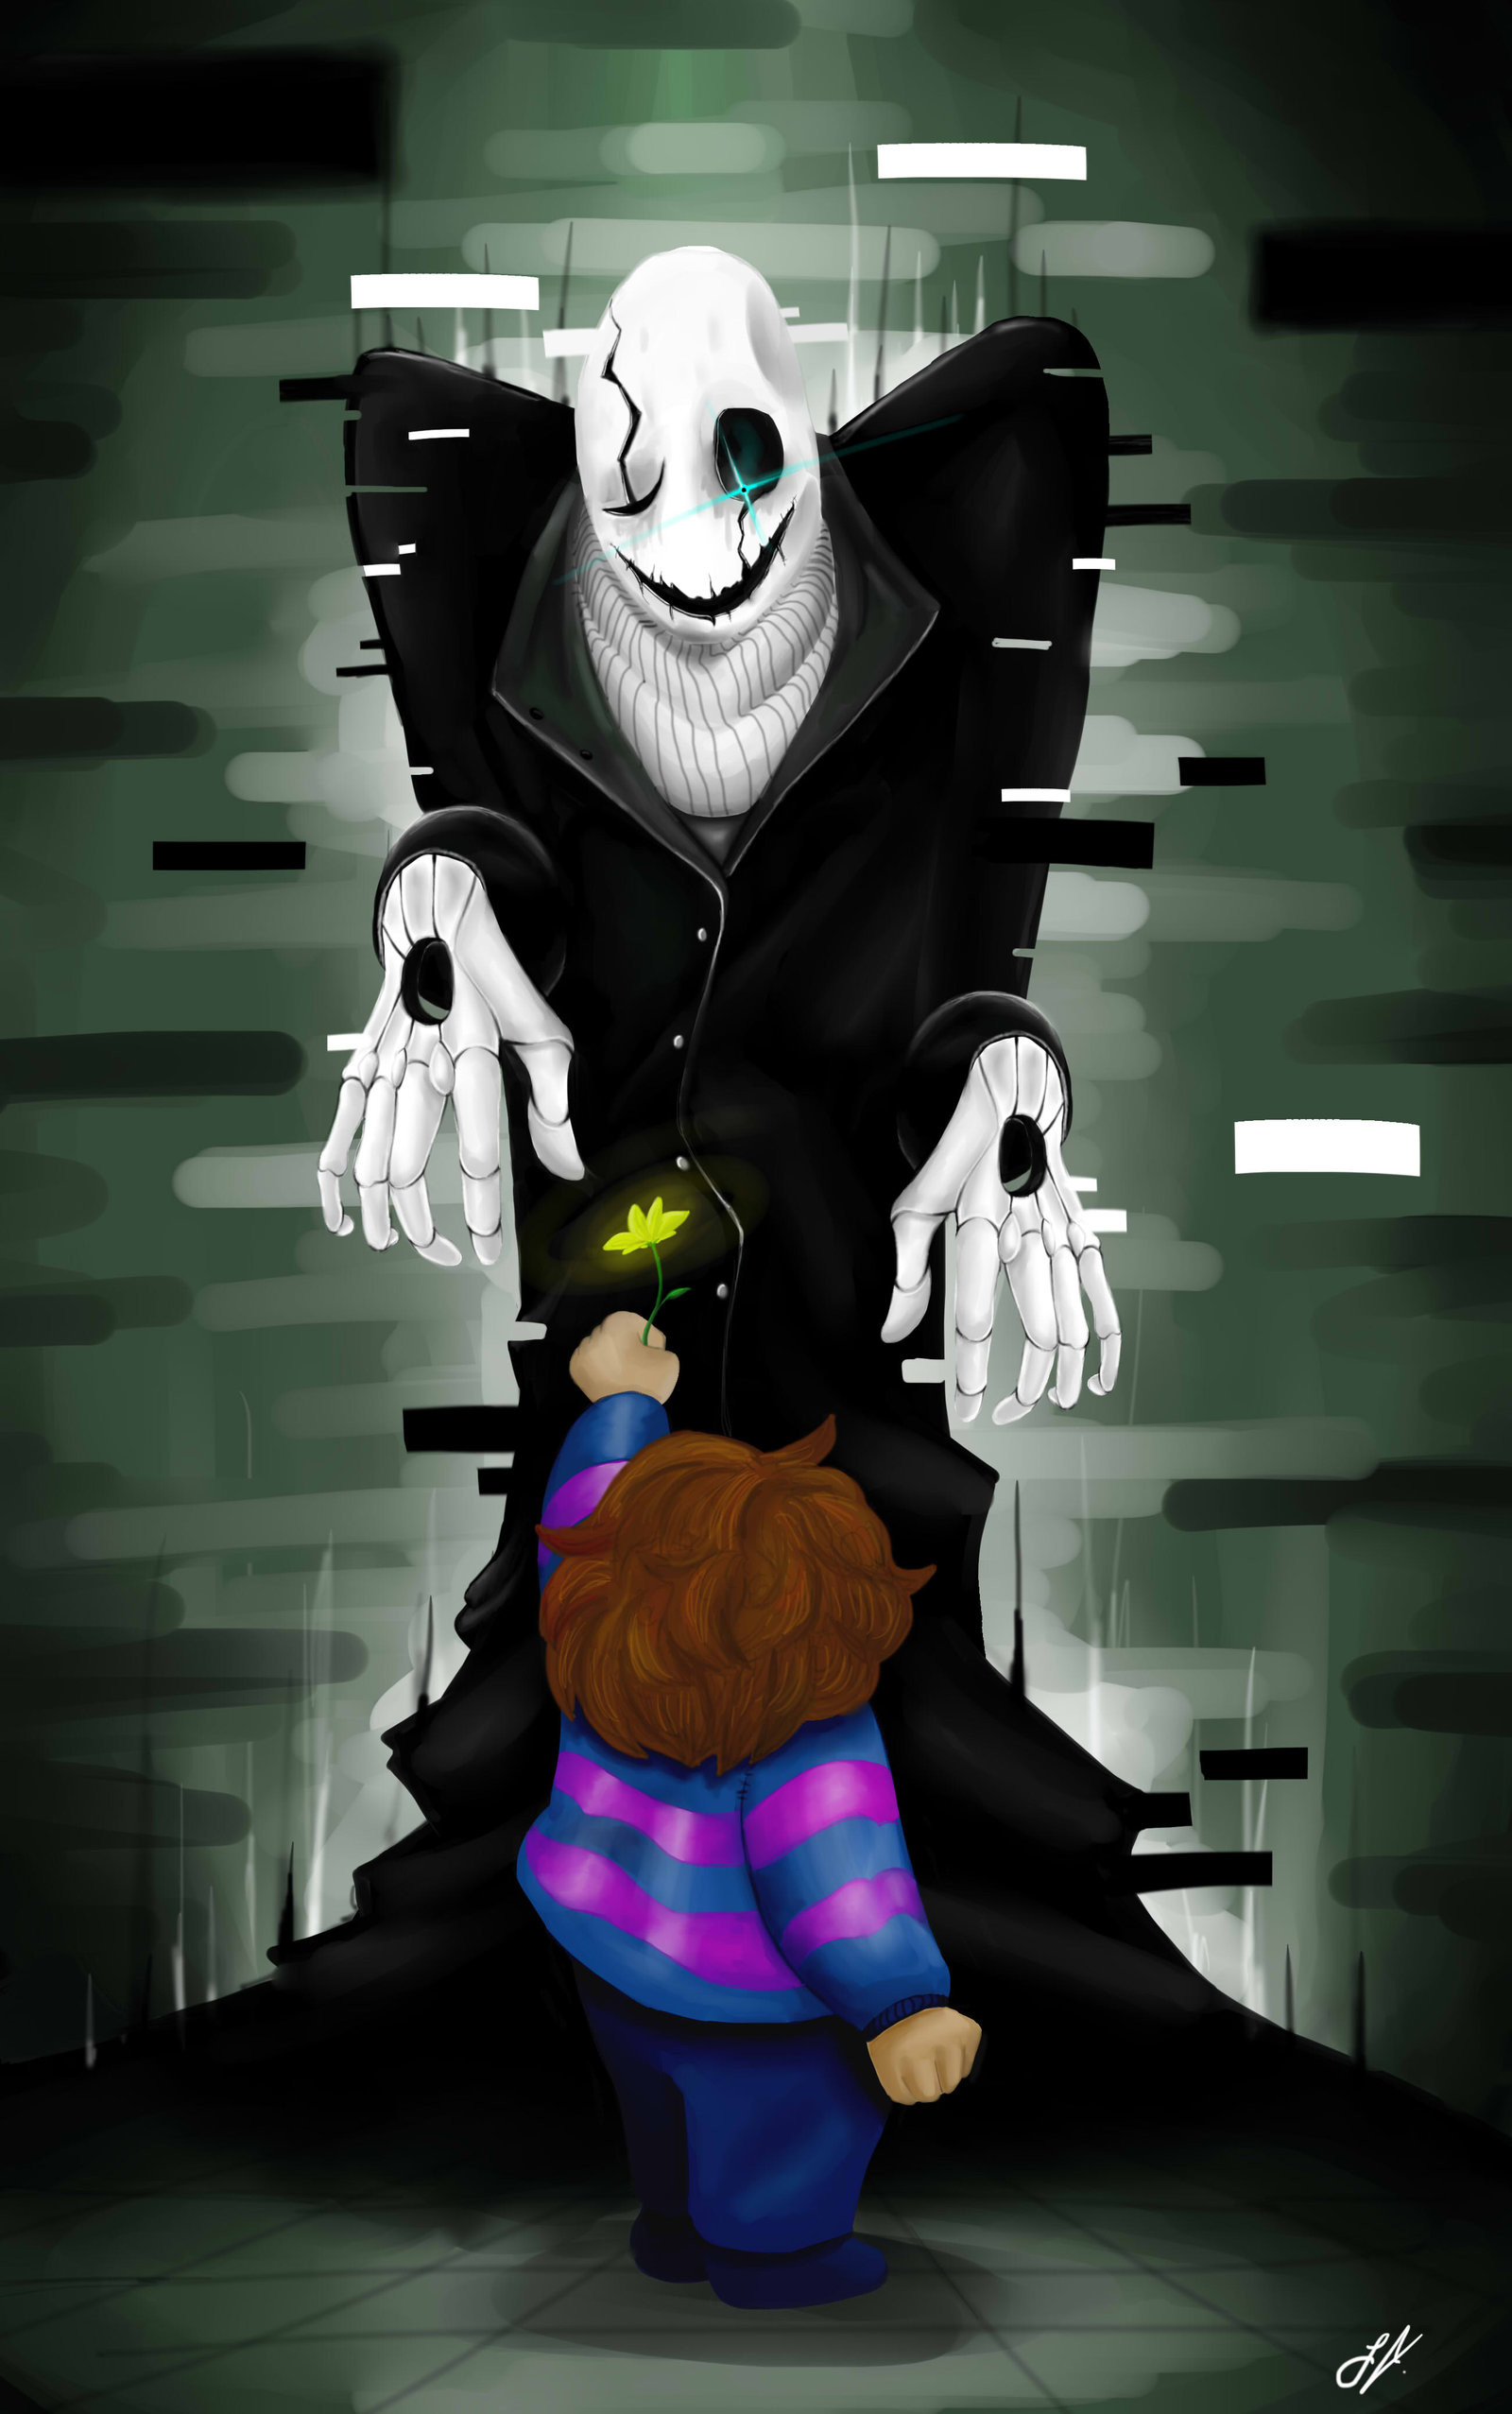 1005954 illustration anime Undertale W D Gaster darkness screenshot  fictional character  Rare Gallery HD Wallpapers